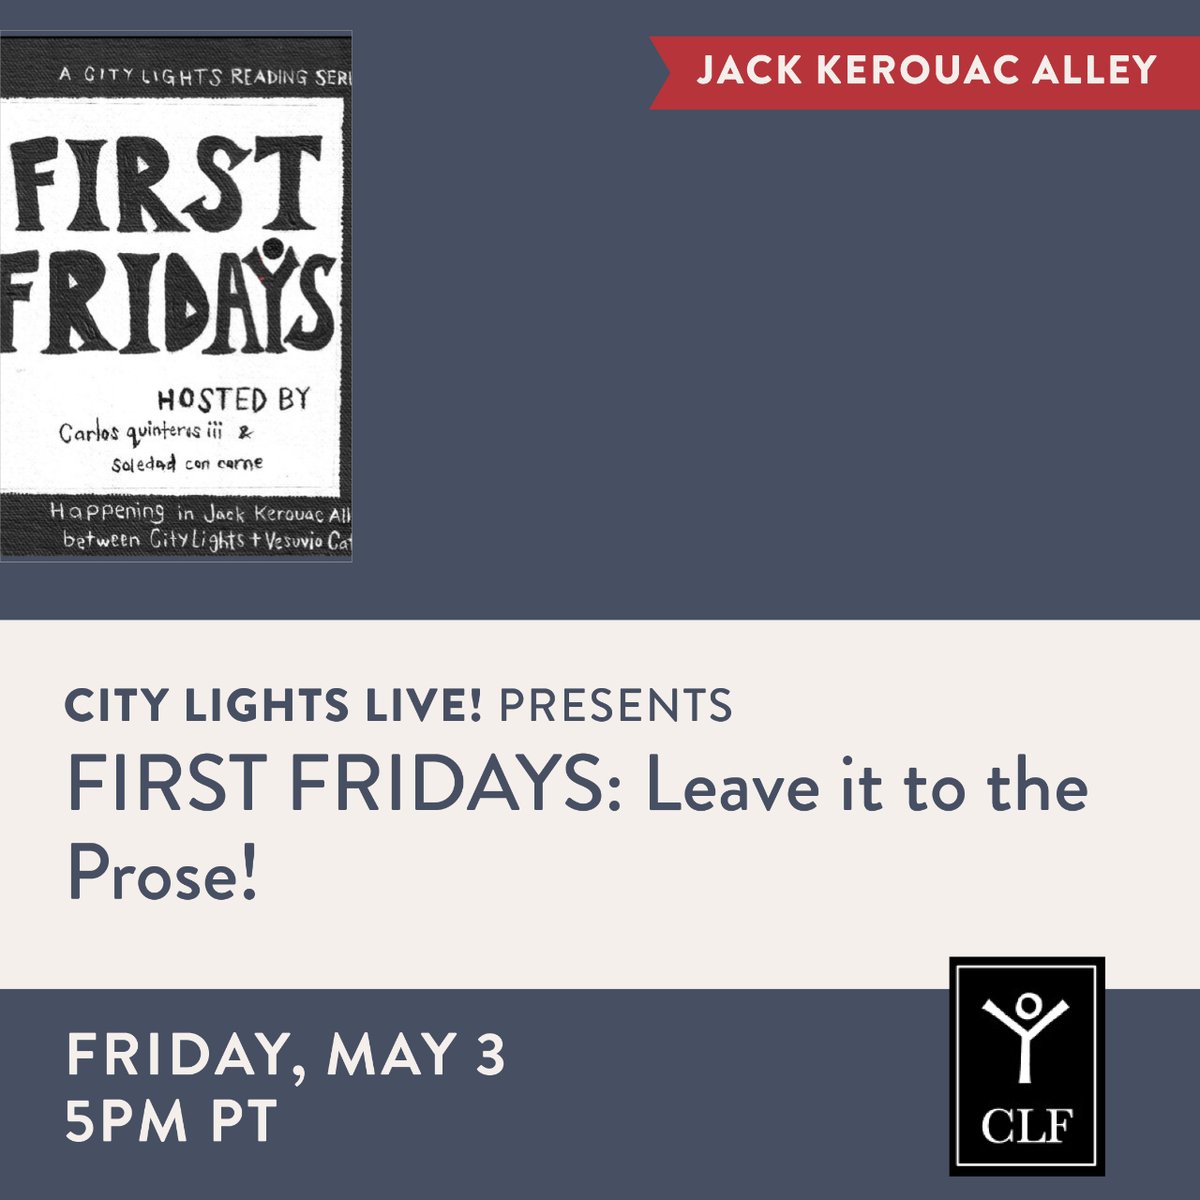 Join us for FIRST FRIDAYS: Leave it to the Prose! This May 3 at 5 pm. Enjoy readings by London Pinkney, Elodie Townsend, and Matt Pacelli, with hosts Carlos Quinteros III and soledad con carne. The event will be in Jack Kerouac Alley.